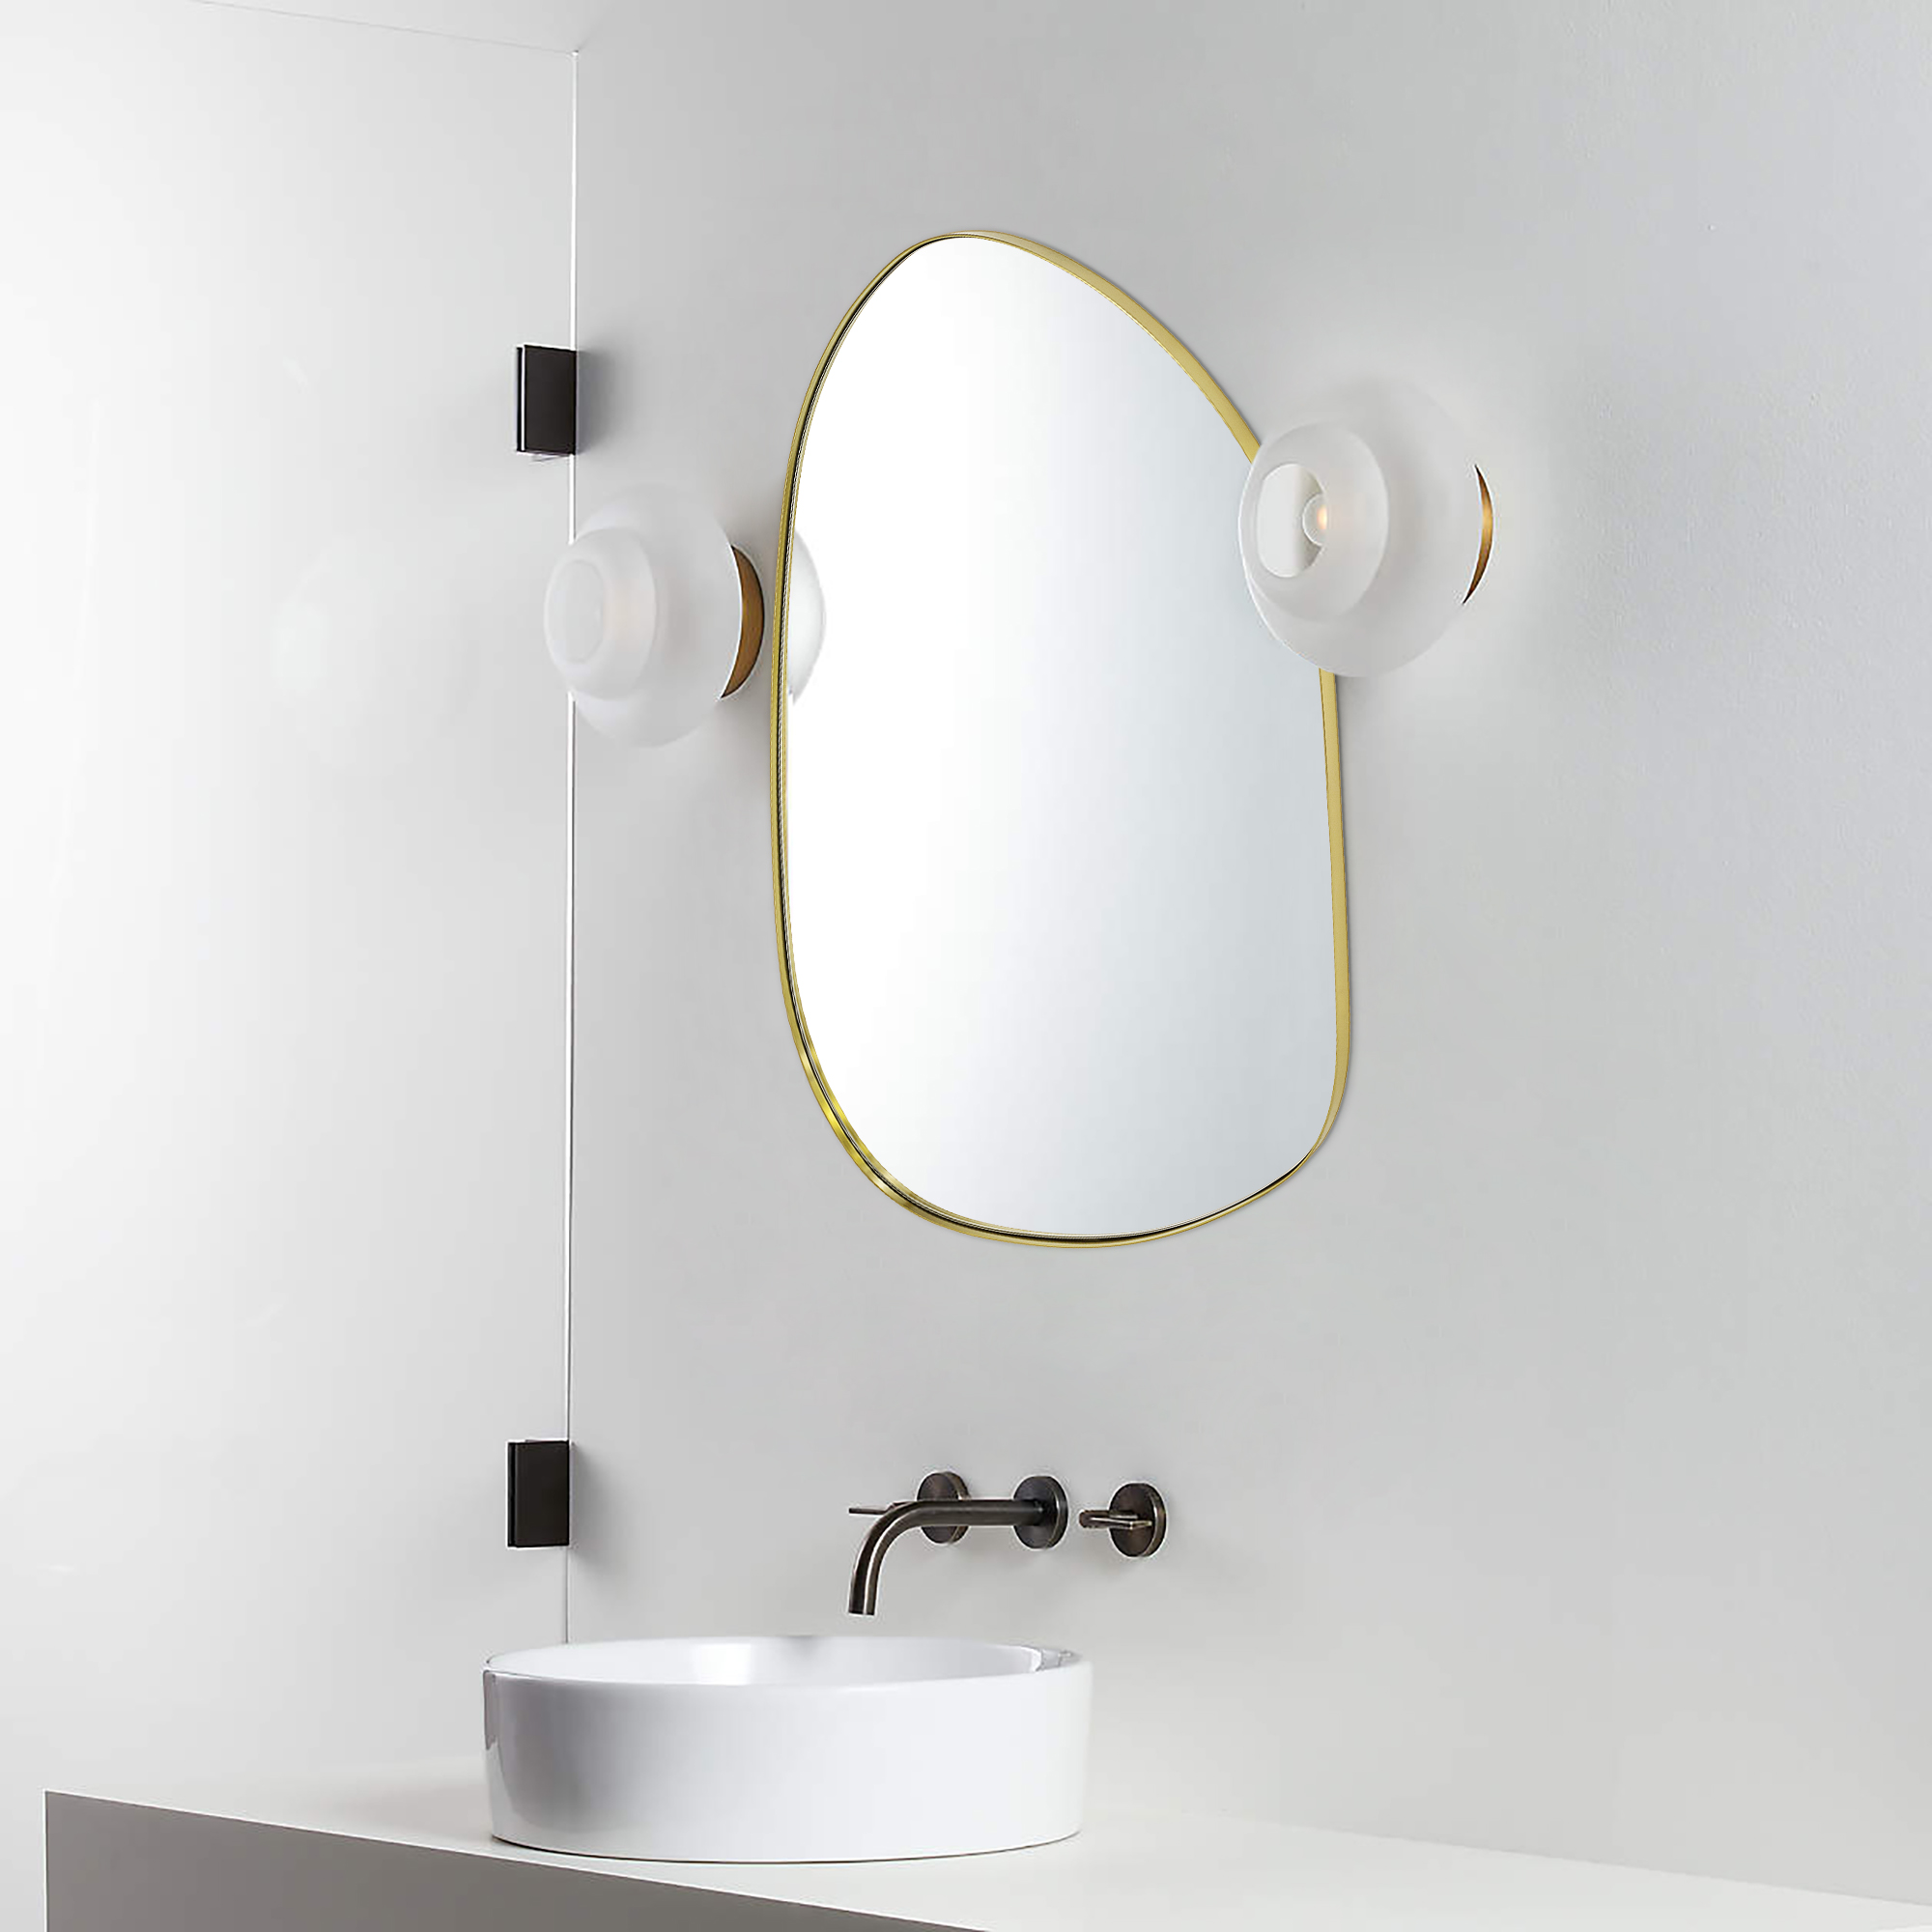 Bertlinde asymmetrical wall mirror irregular shaped mirror for living room, bathroom or entry-30x22-Brushed Gold